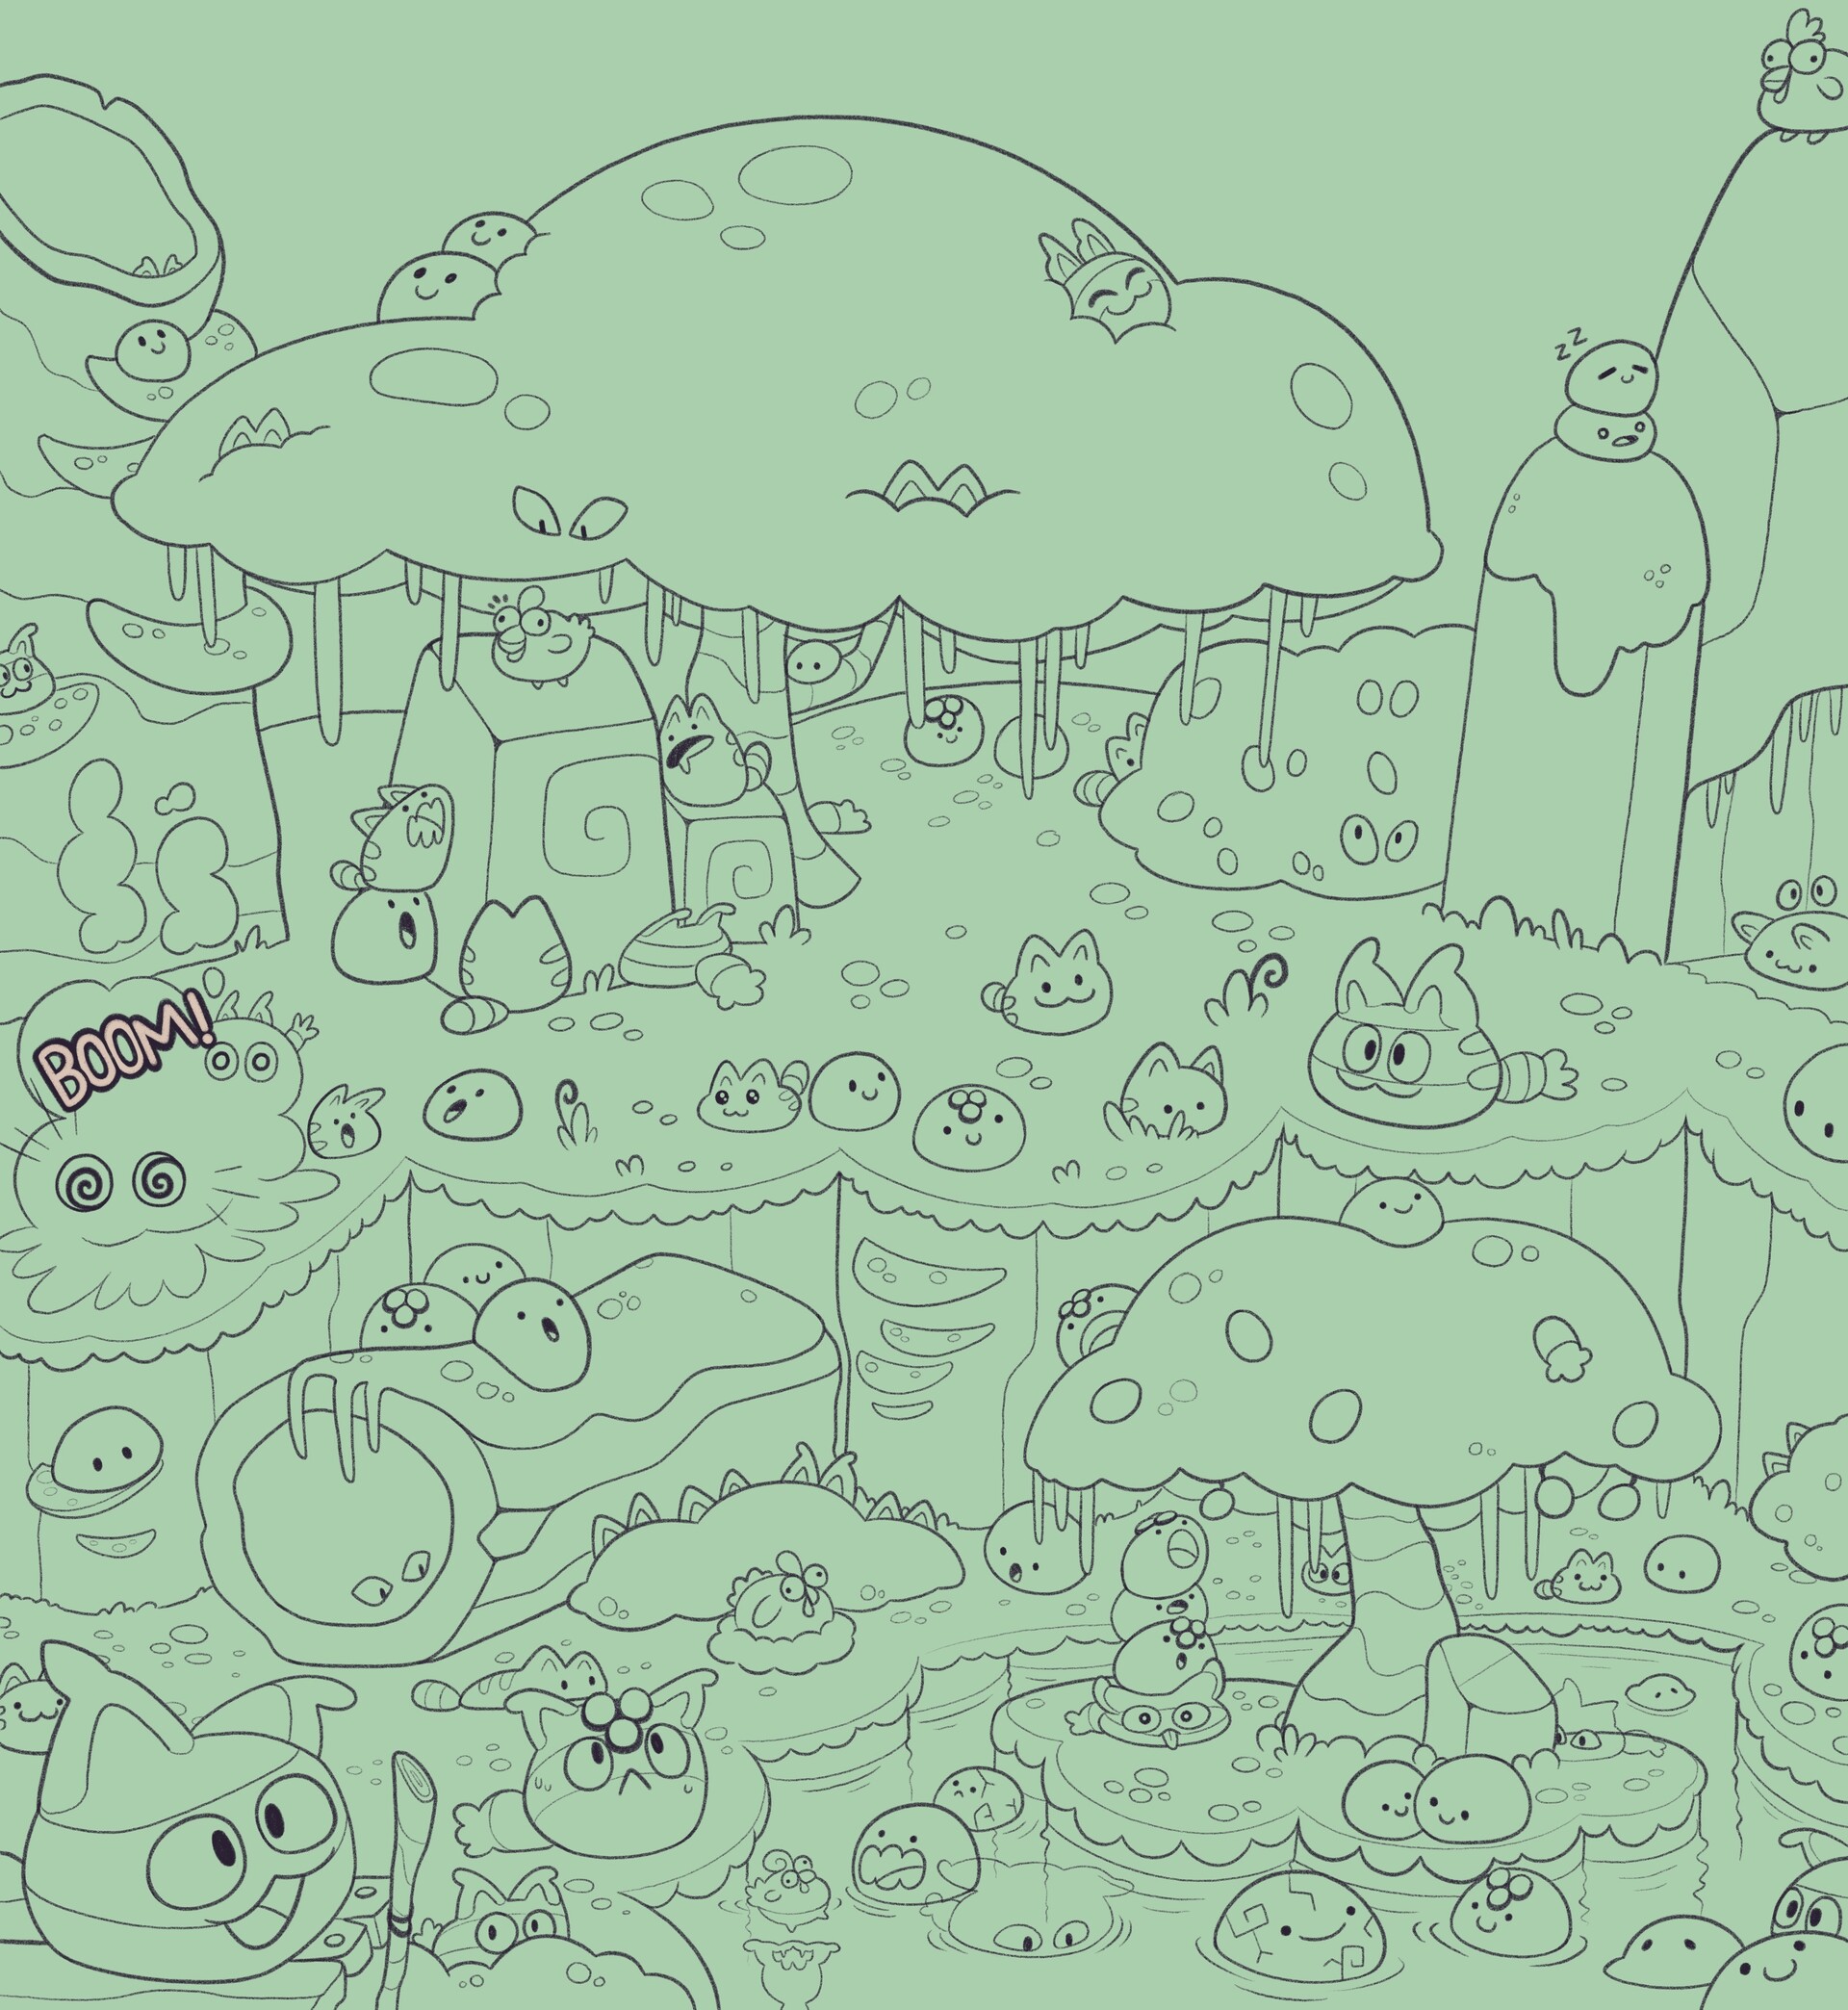 Ocean Rancher slime 03 (coloring page lineart) by Shine-like-the